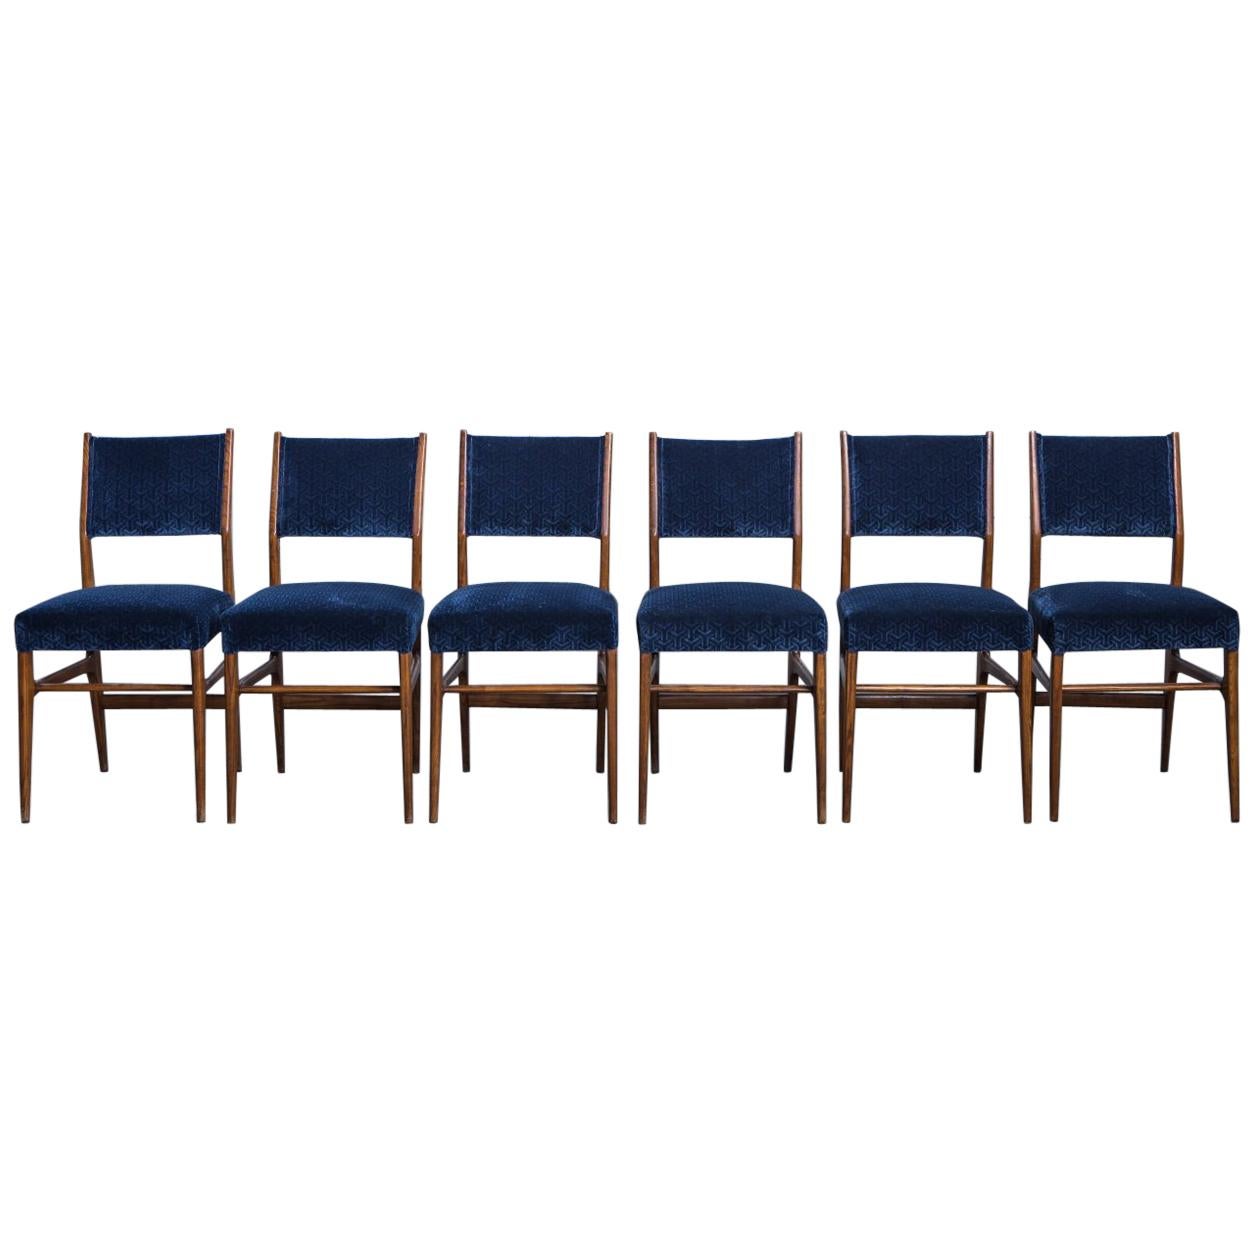 Set of 6 Gio Ponti Dining Chairs for Cassina, Italy, 1950s